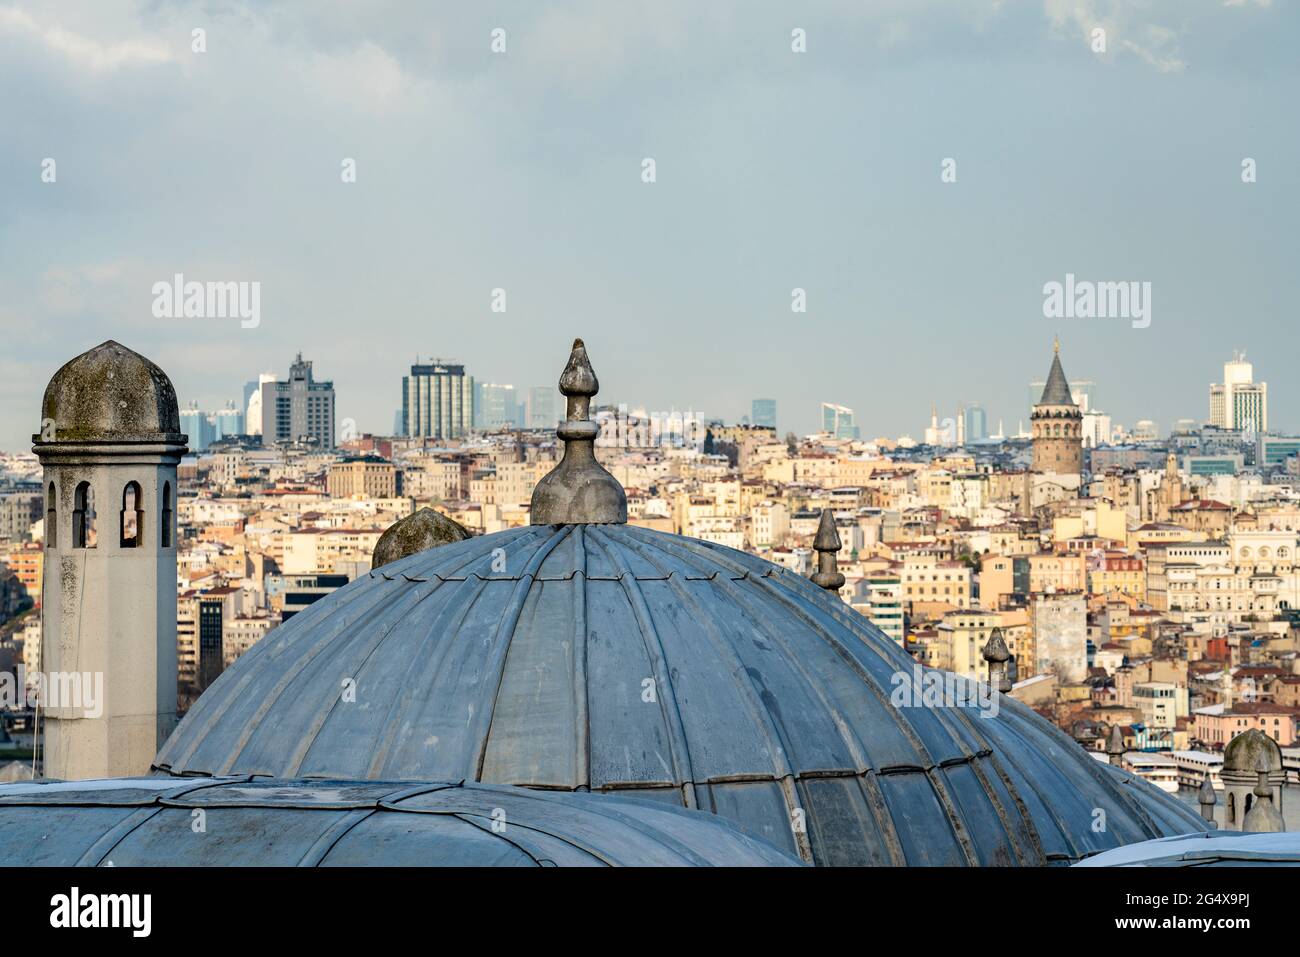 Turkey, Istanbul, Dome of Suleymaniye Mosque with city buildings in background Stock Photo